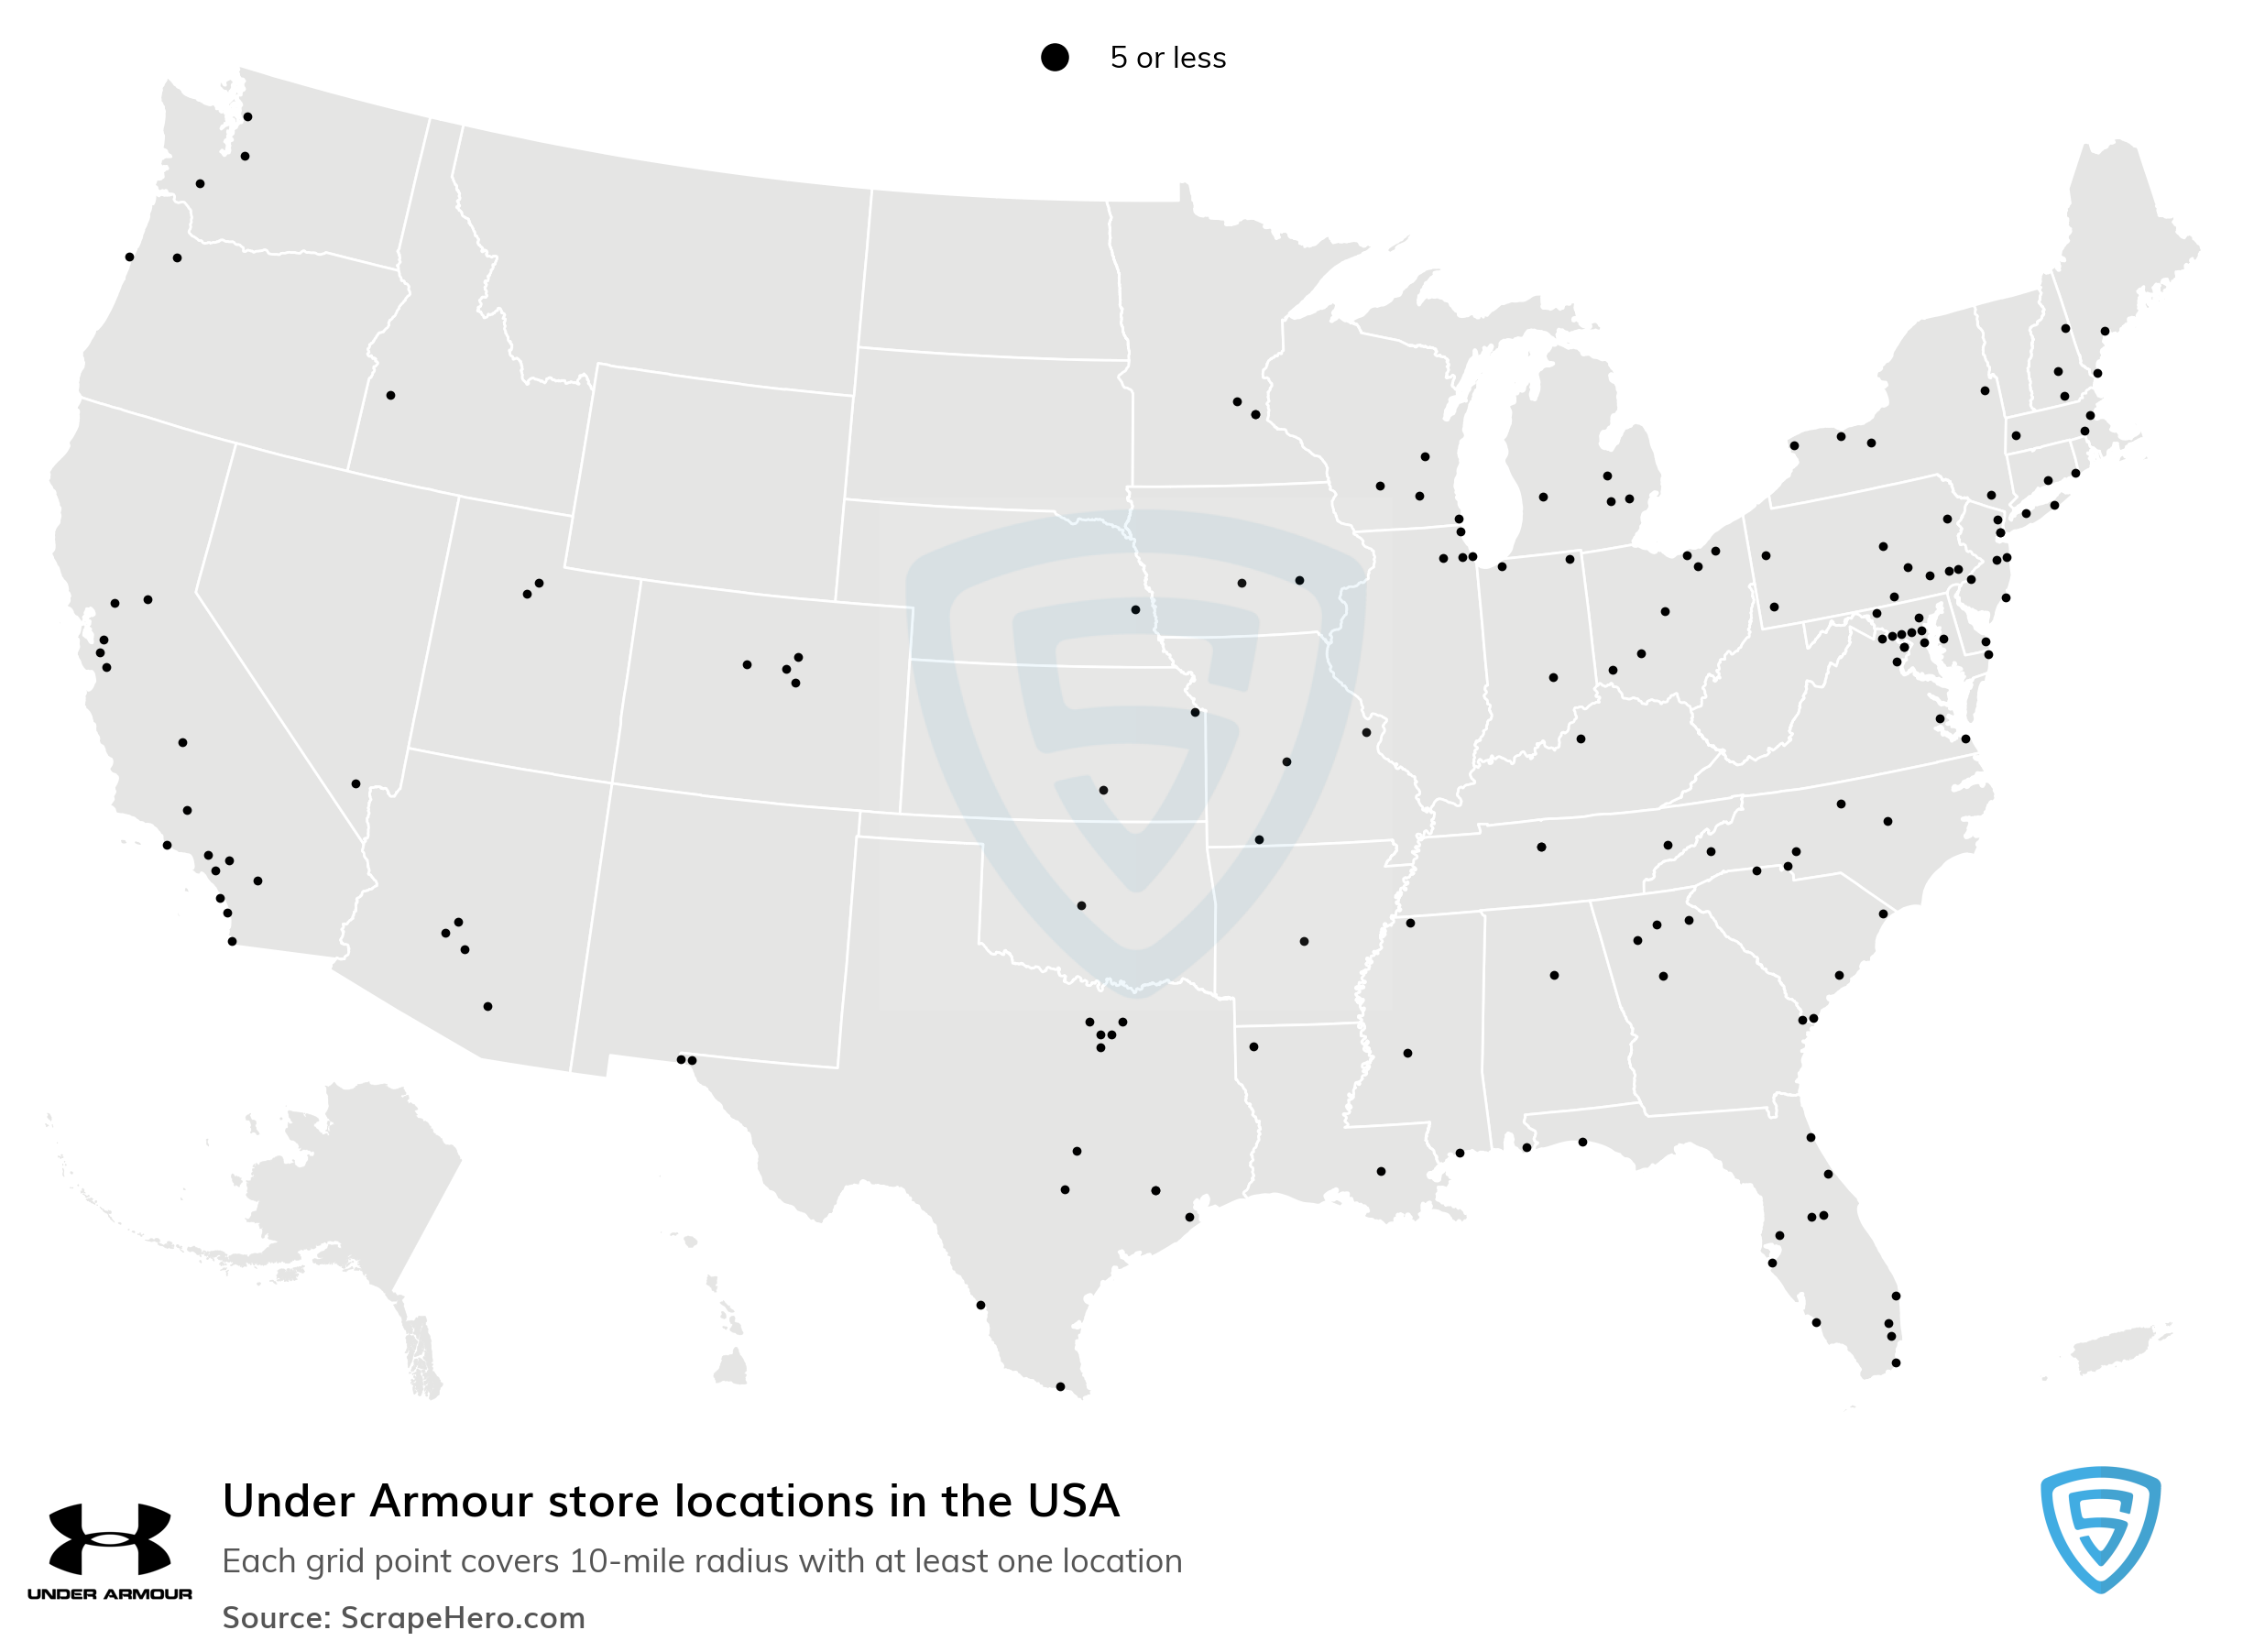 terug Ultieme ga sightseeing Number of Under Armour locations in the USA in 2023 | ScrapeHero